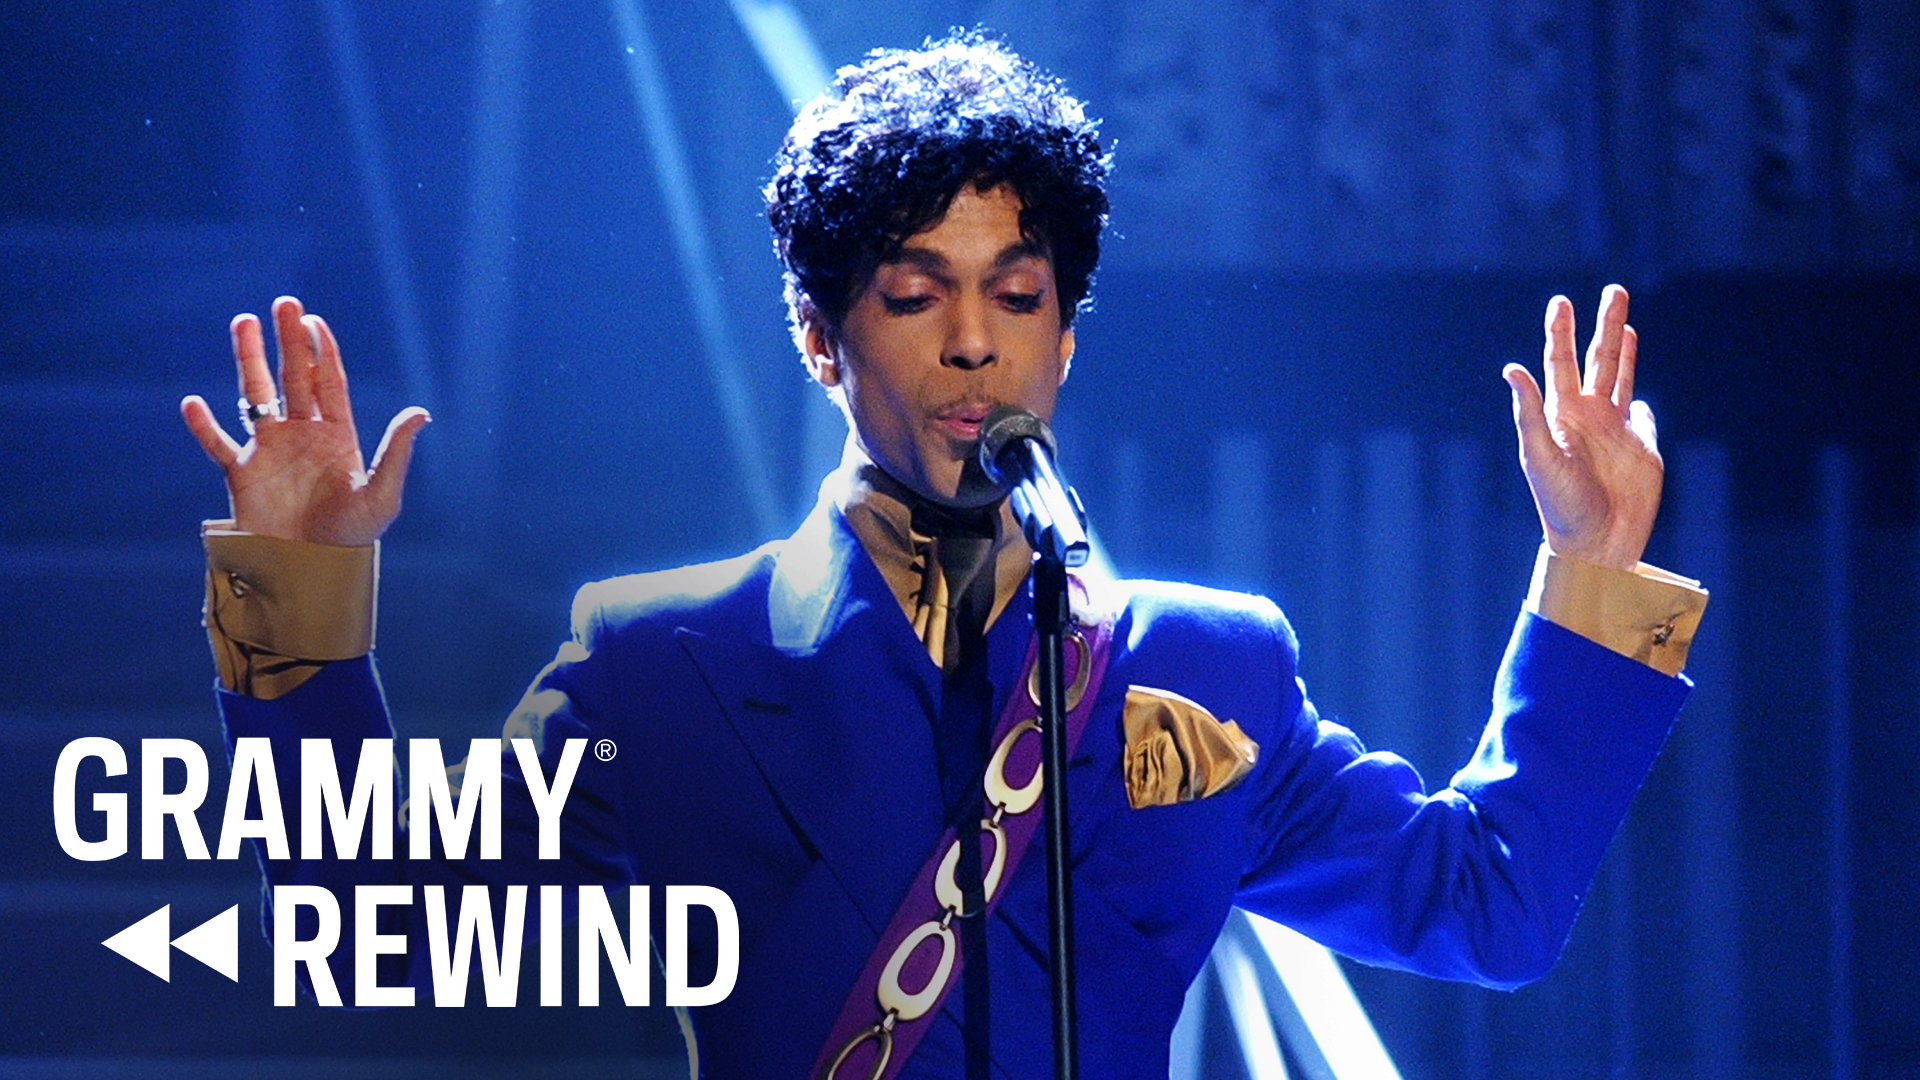 Watch Highlights From Prince's Iconic GRAMMY Moments | GRAMMY Rewind